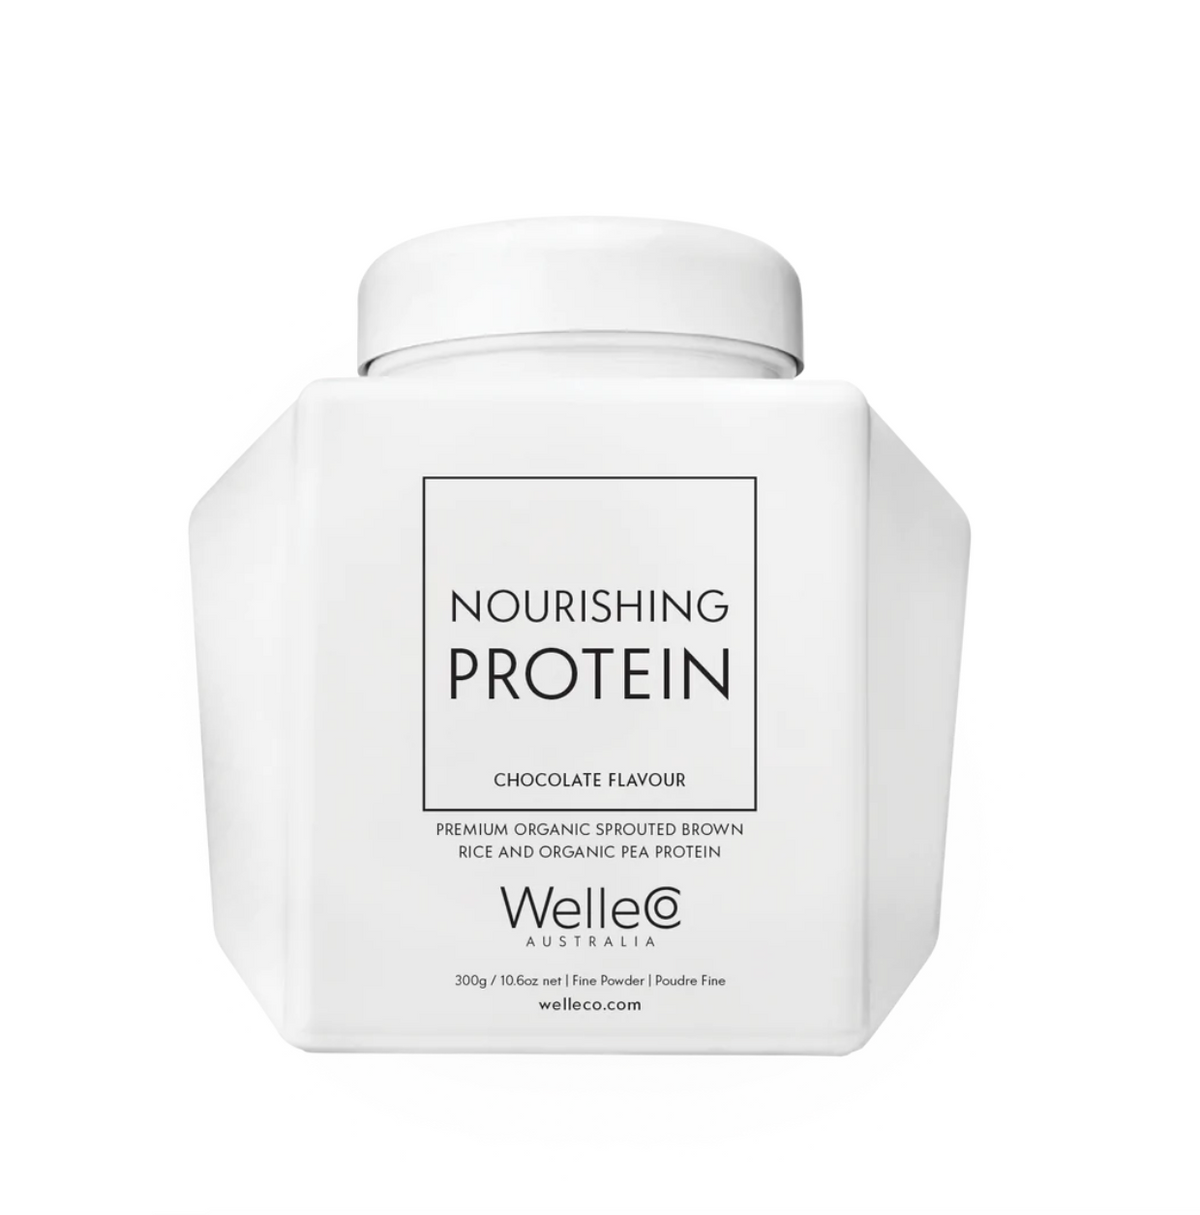 Nourishing Protein Cacao Caddy